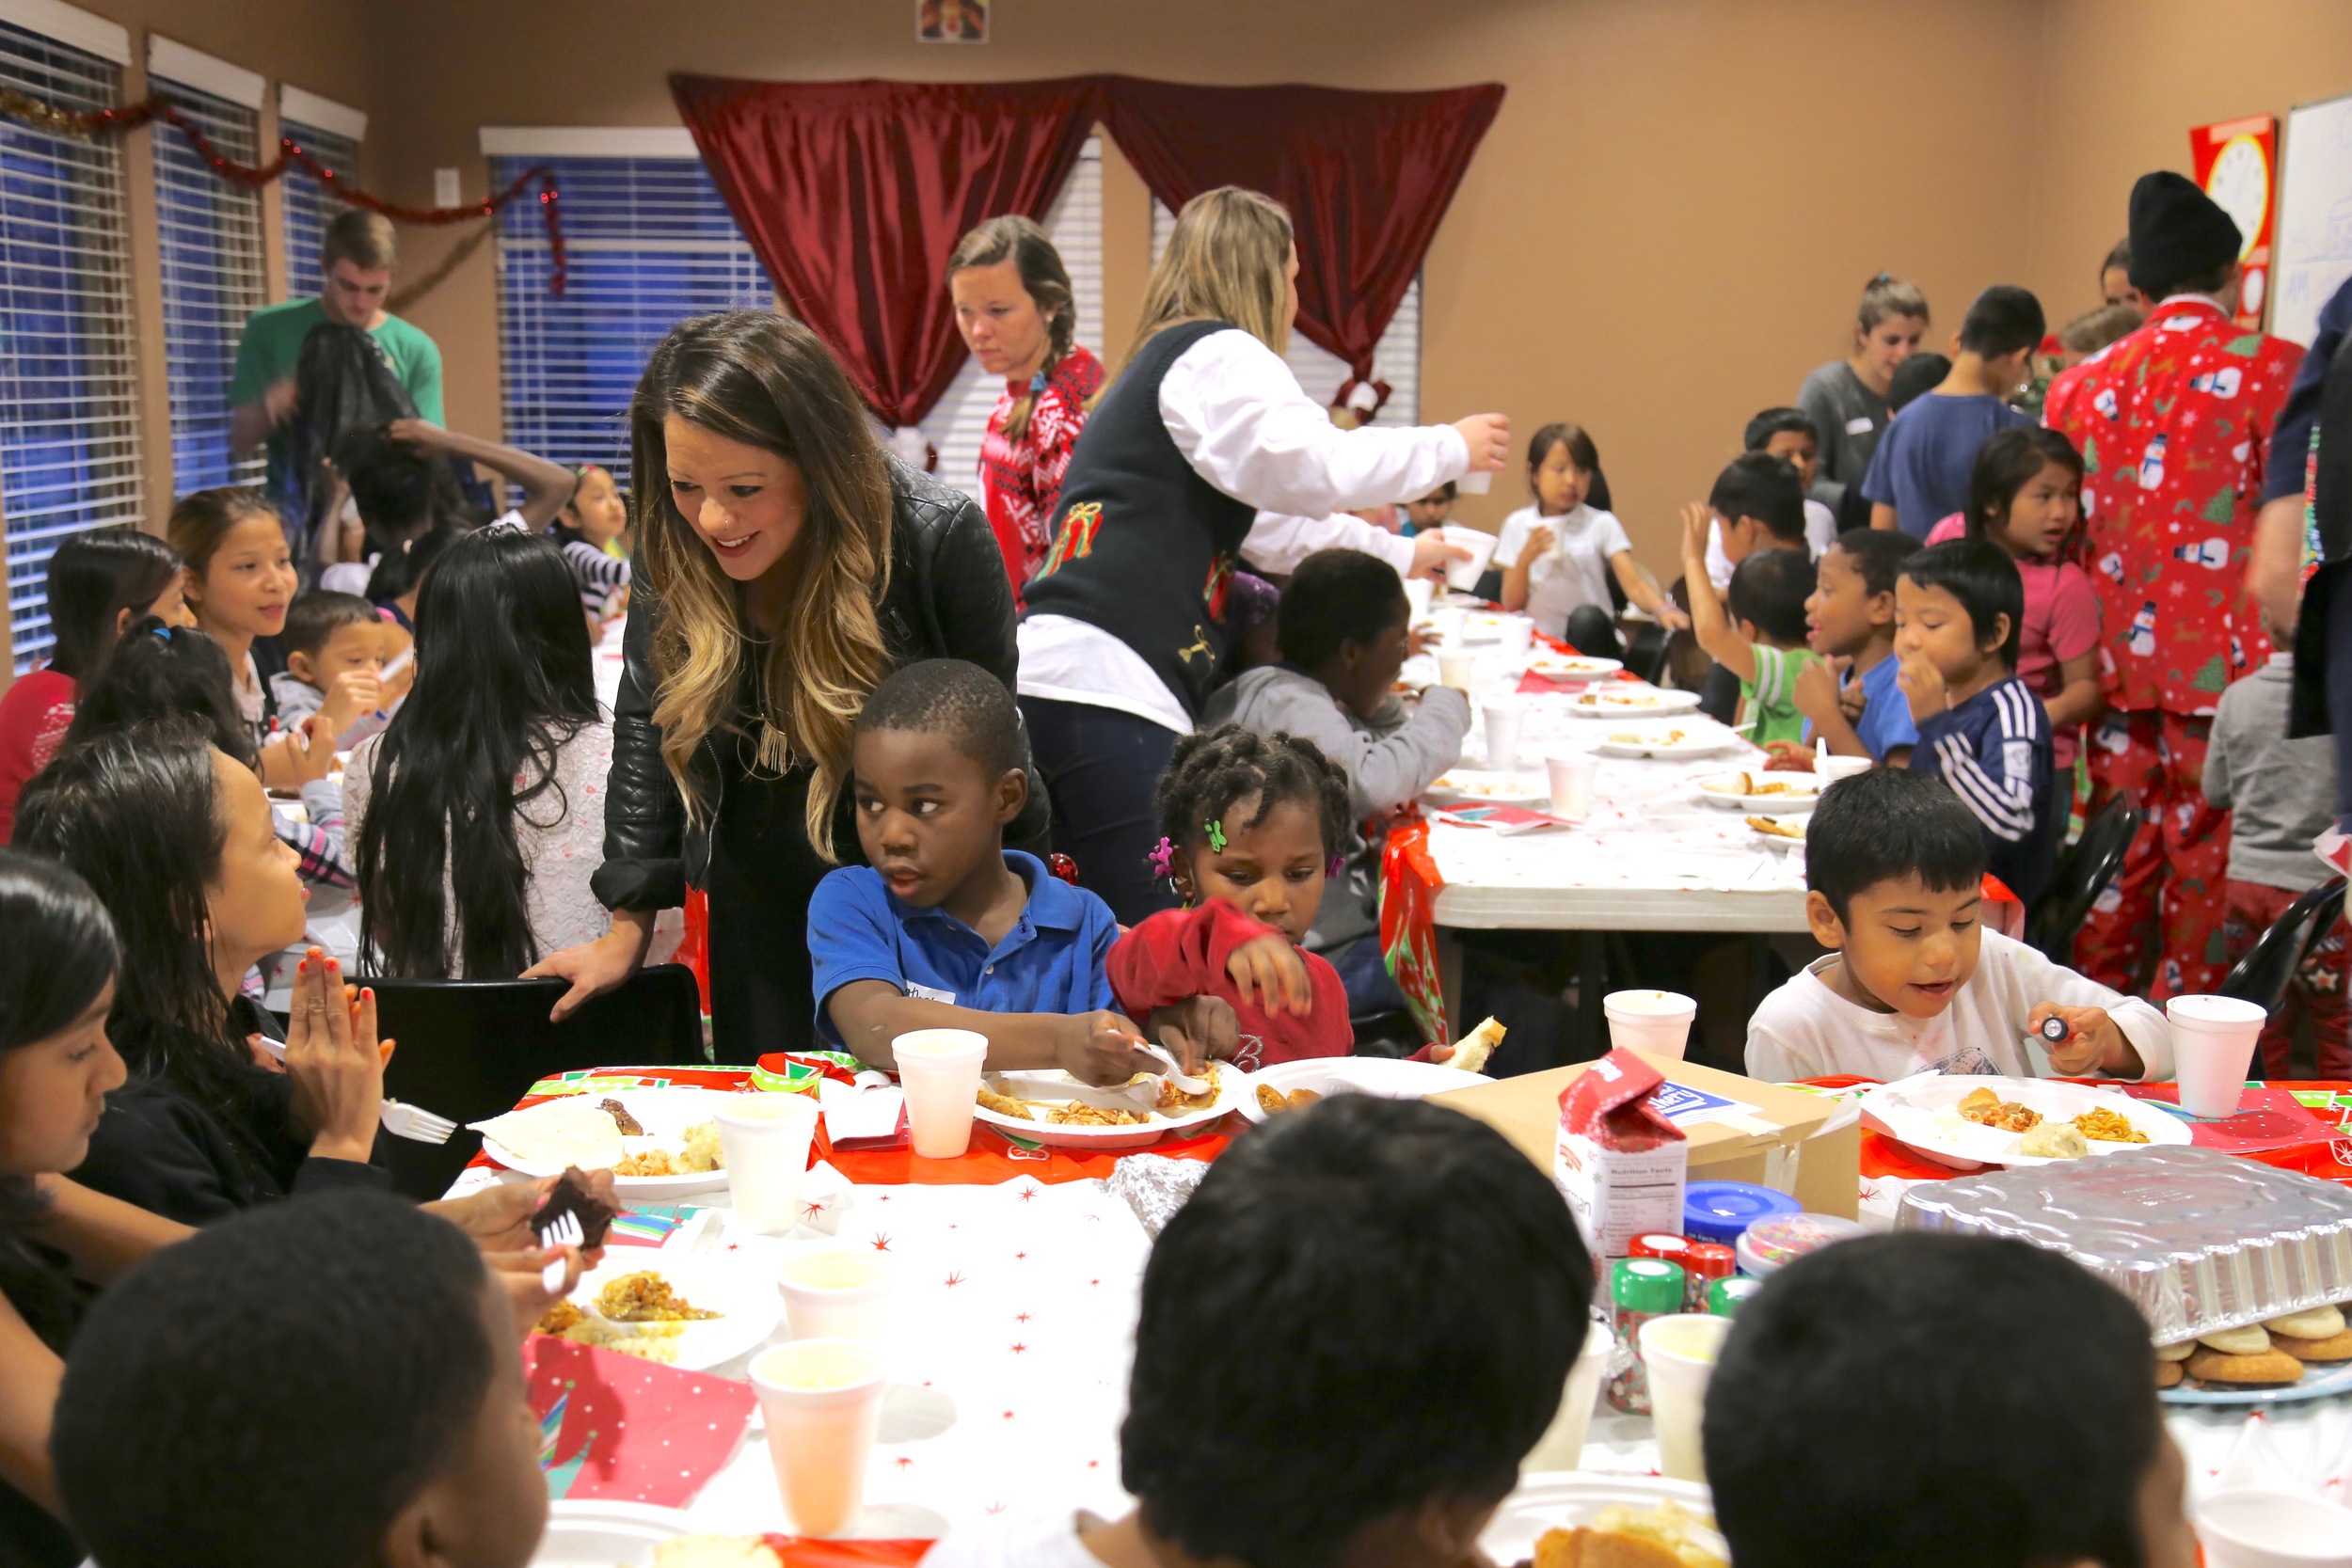  Our kids' program's annual Christmas party 